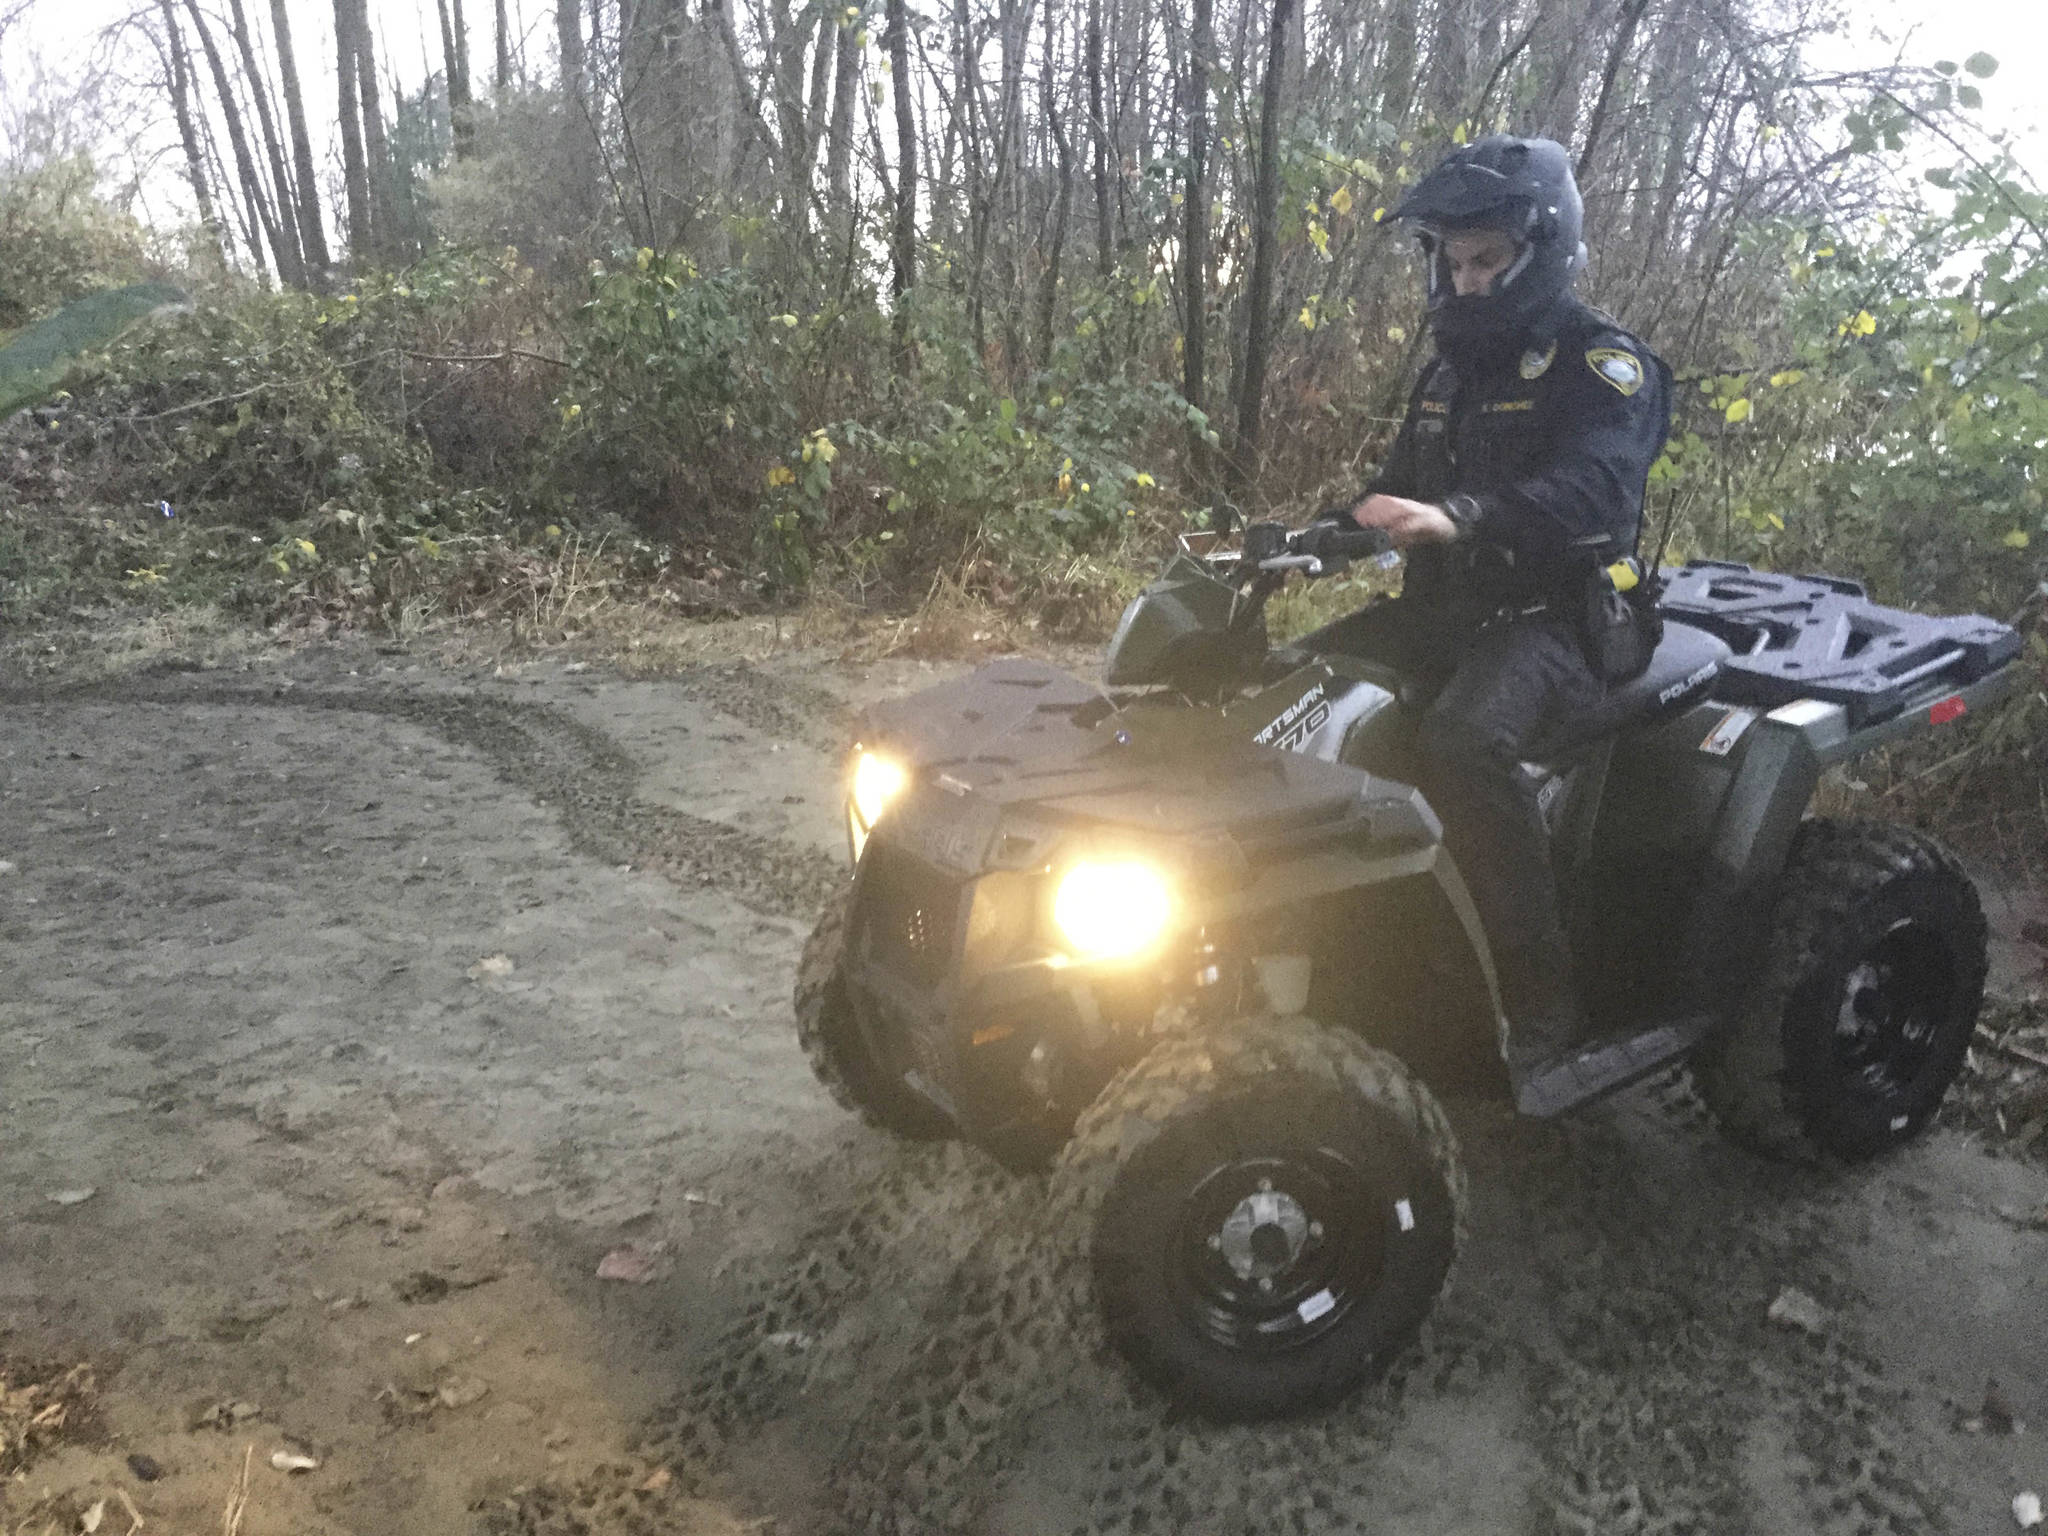 Officer Alex Donchez hits the trail on one of Arlington police’s two new donated all-terrain vehicles.